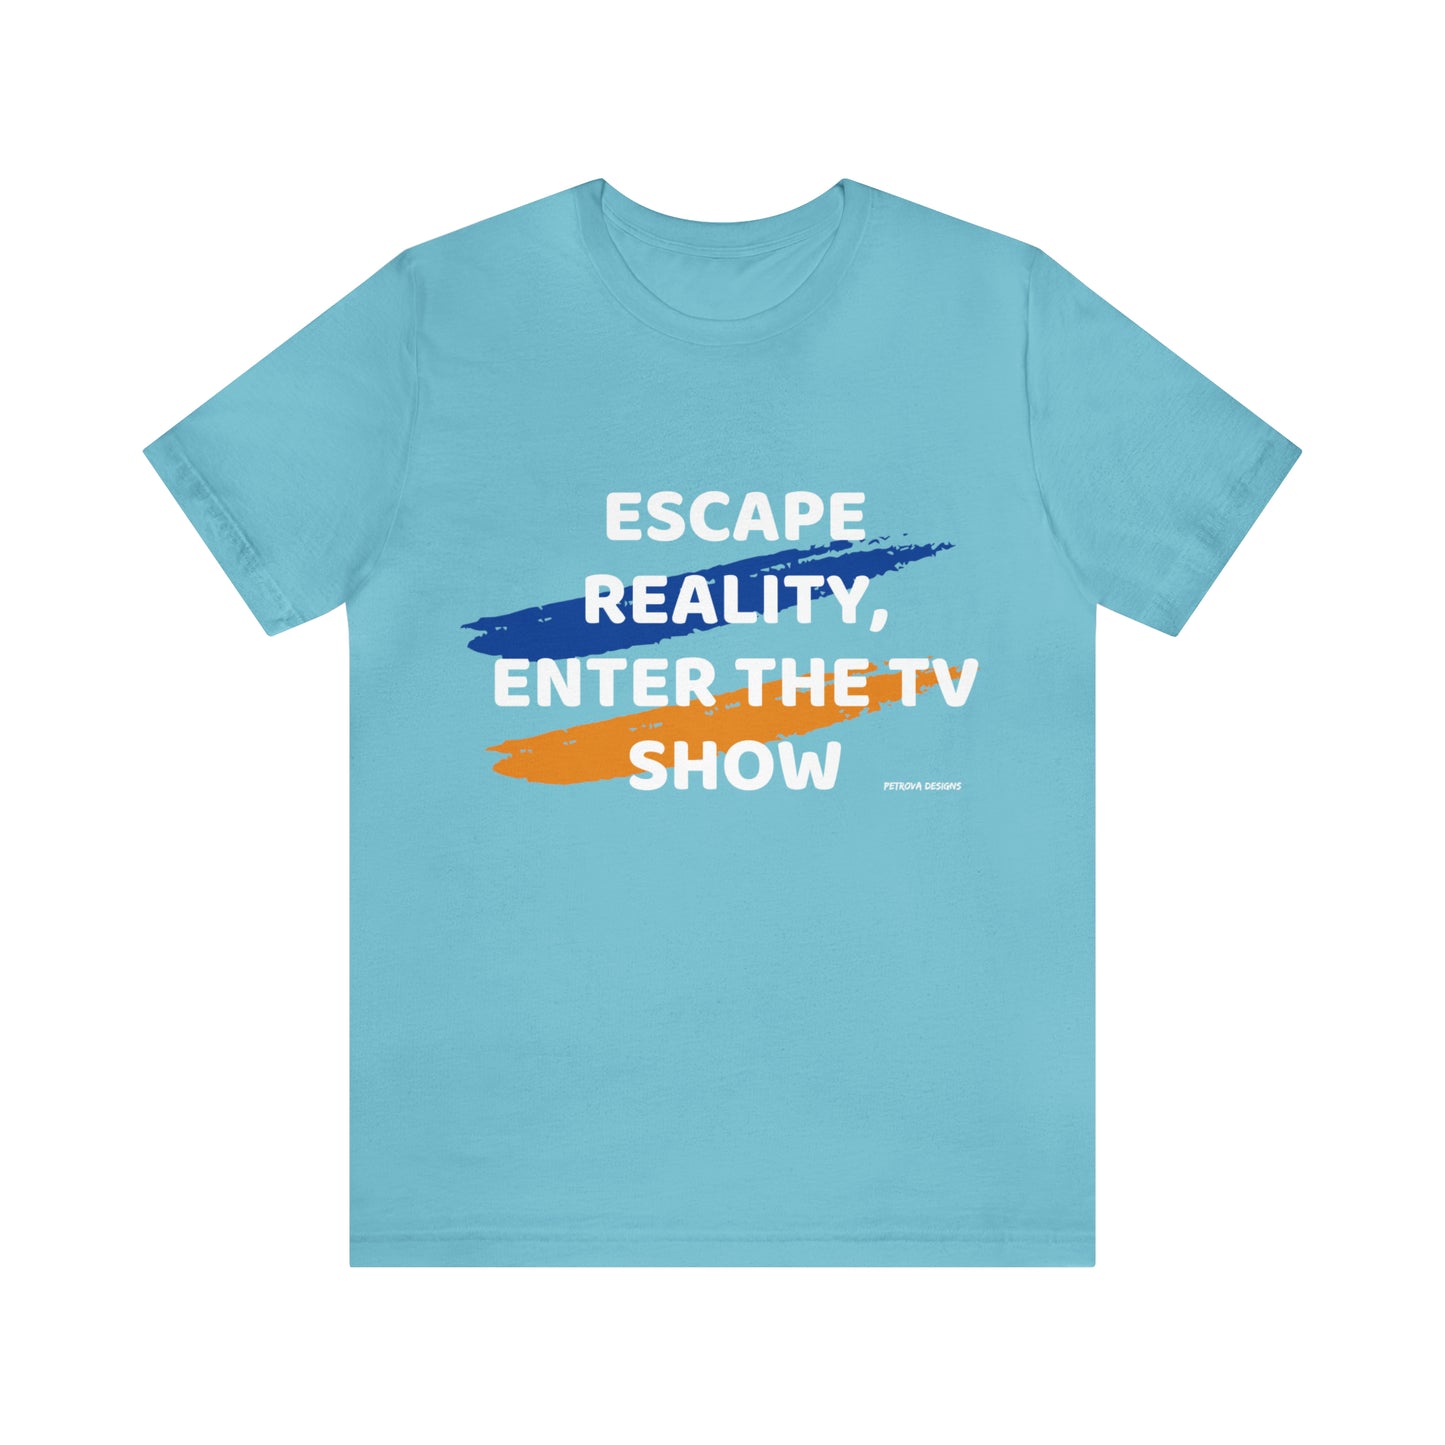 TV Show Lover's Tee - Enter the World of Entertainment T-Shirt Petrova Designs